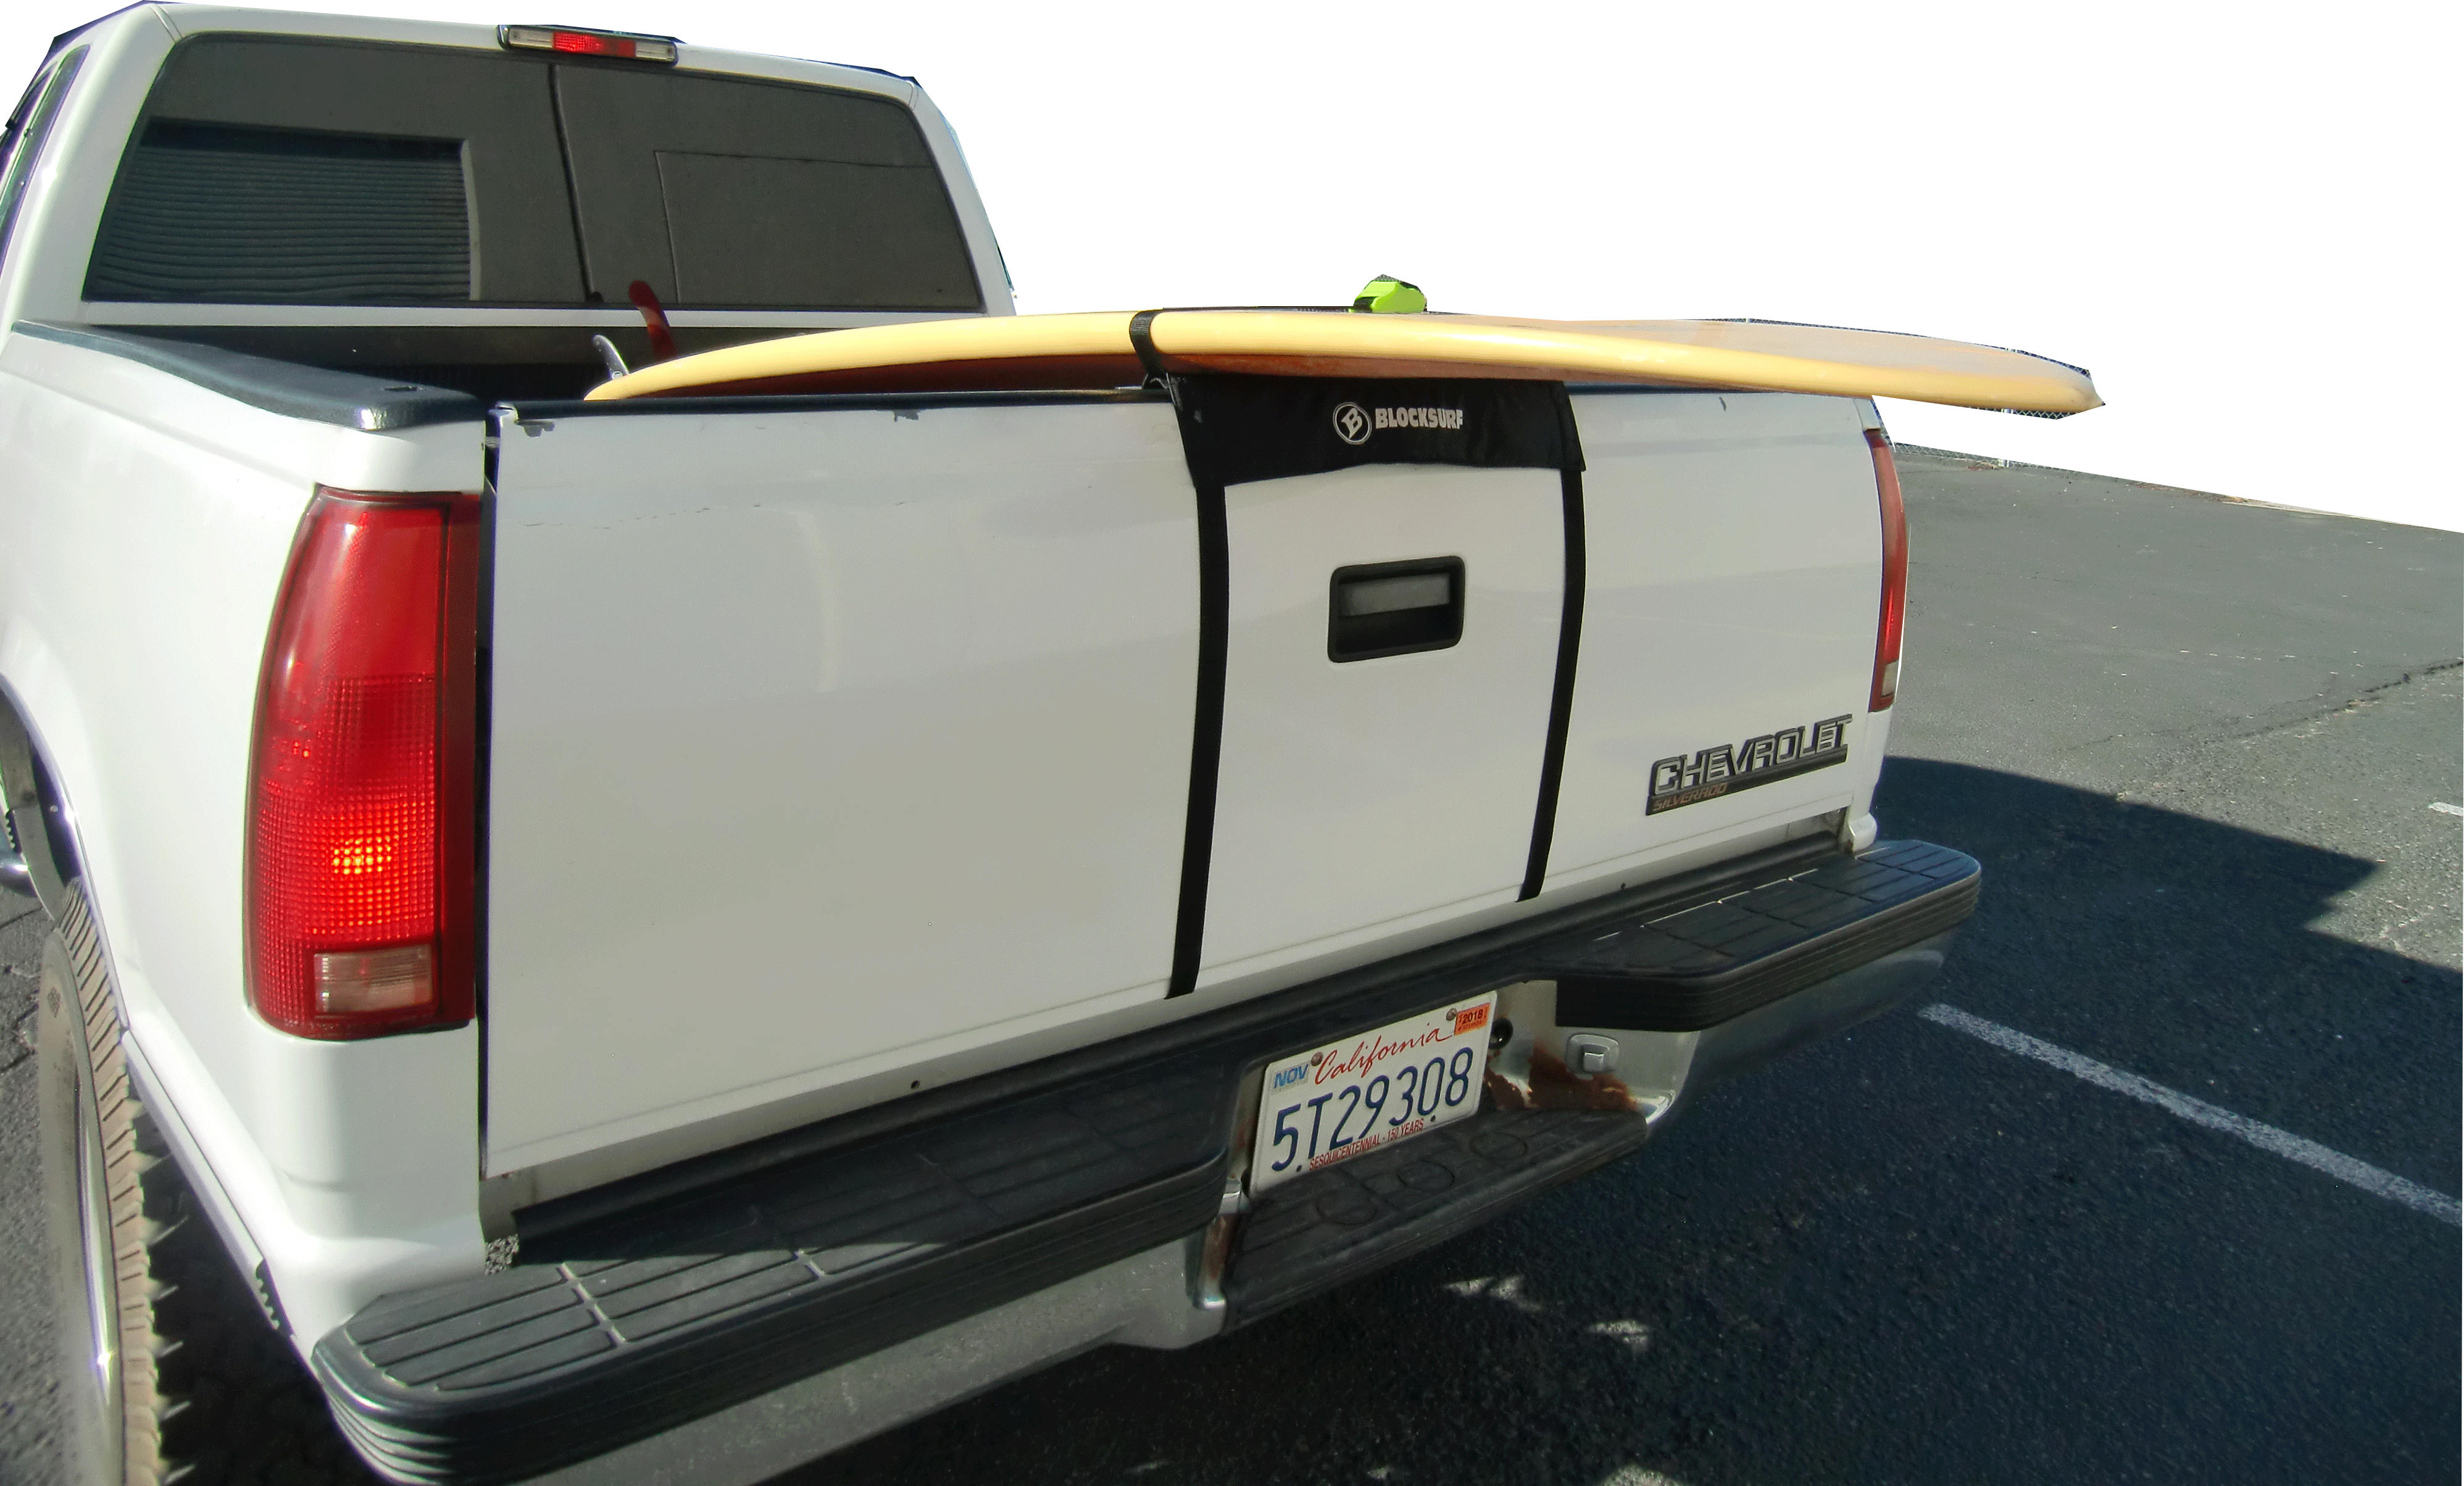 White truck with a Tailgate Rack Pad keeping a yellow surfboard off the tailgate